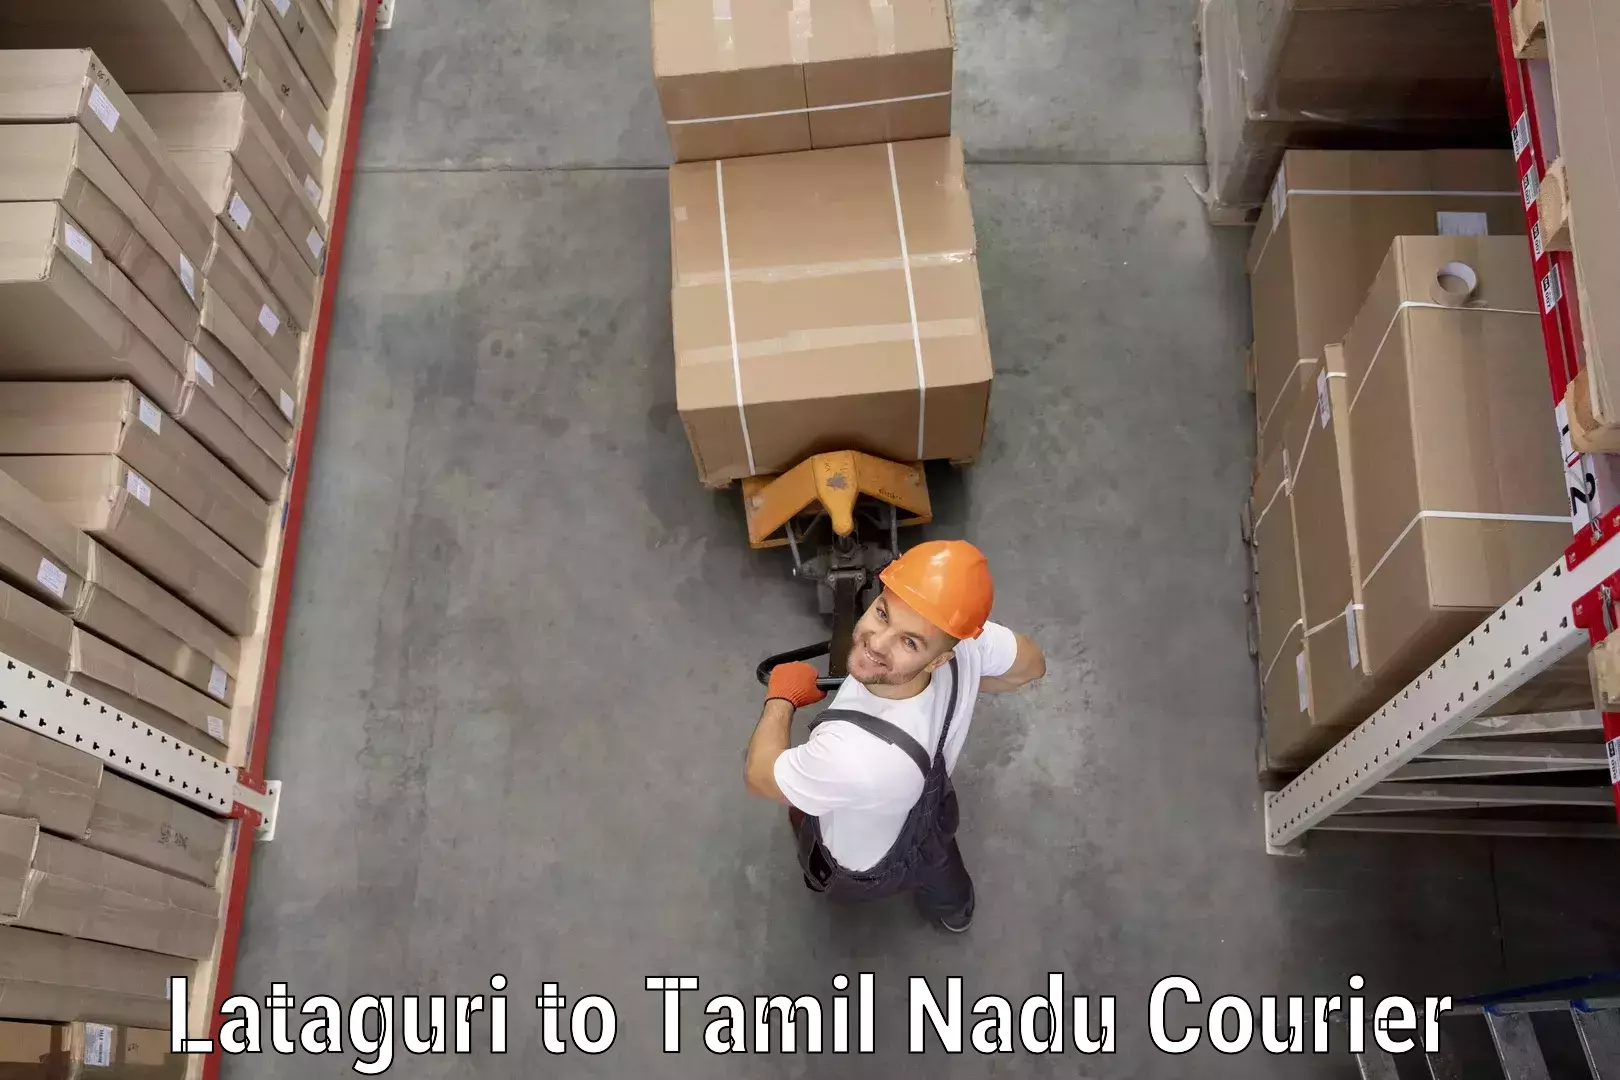 Next-day delivery options Lataguri to Tamil Nadu